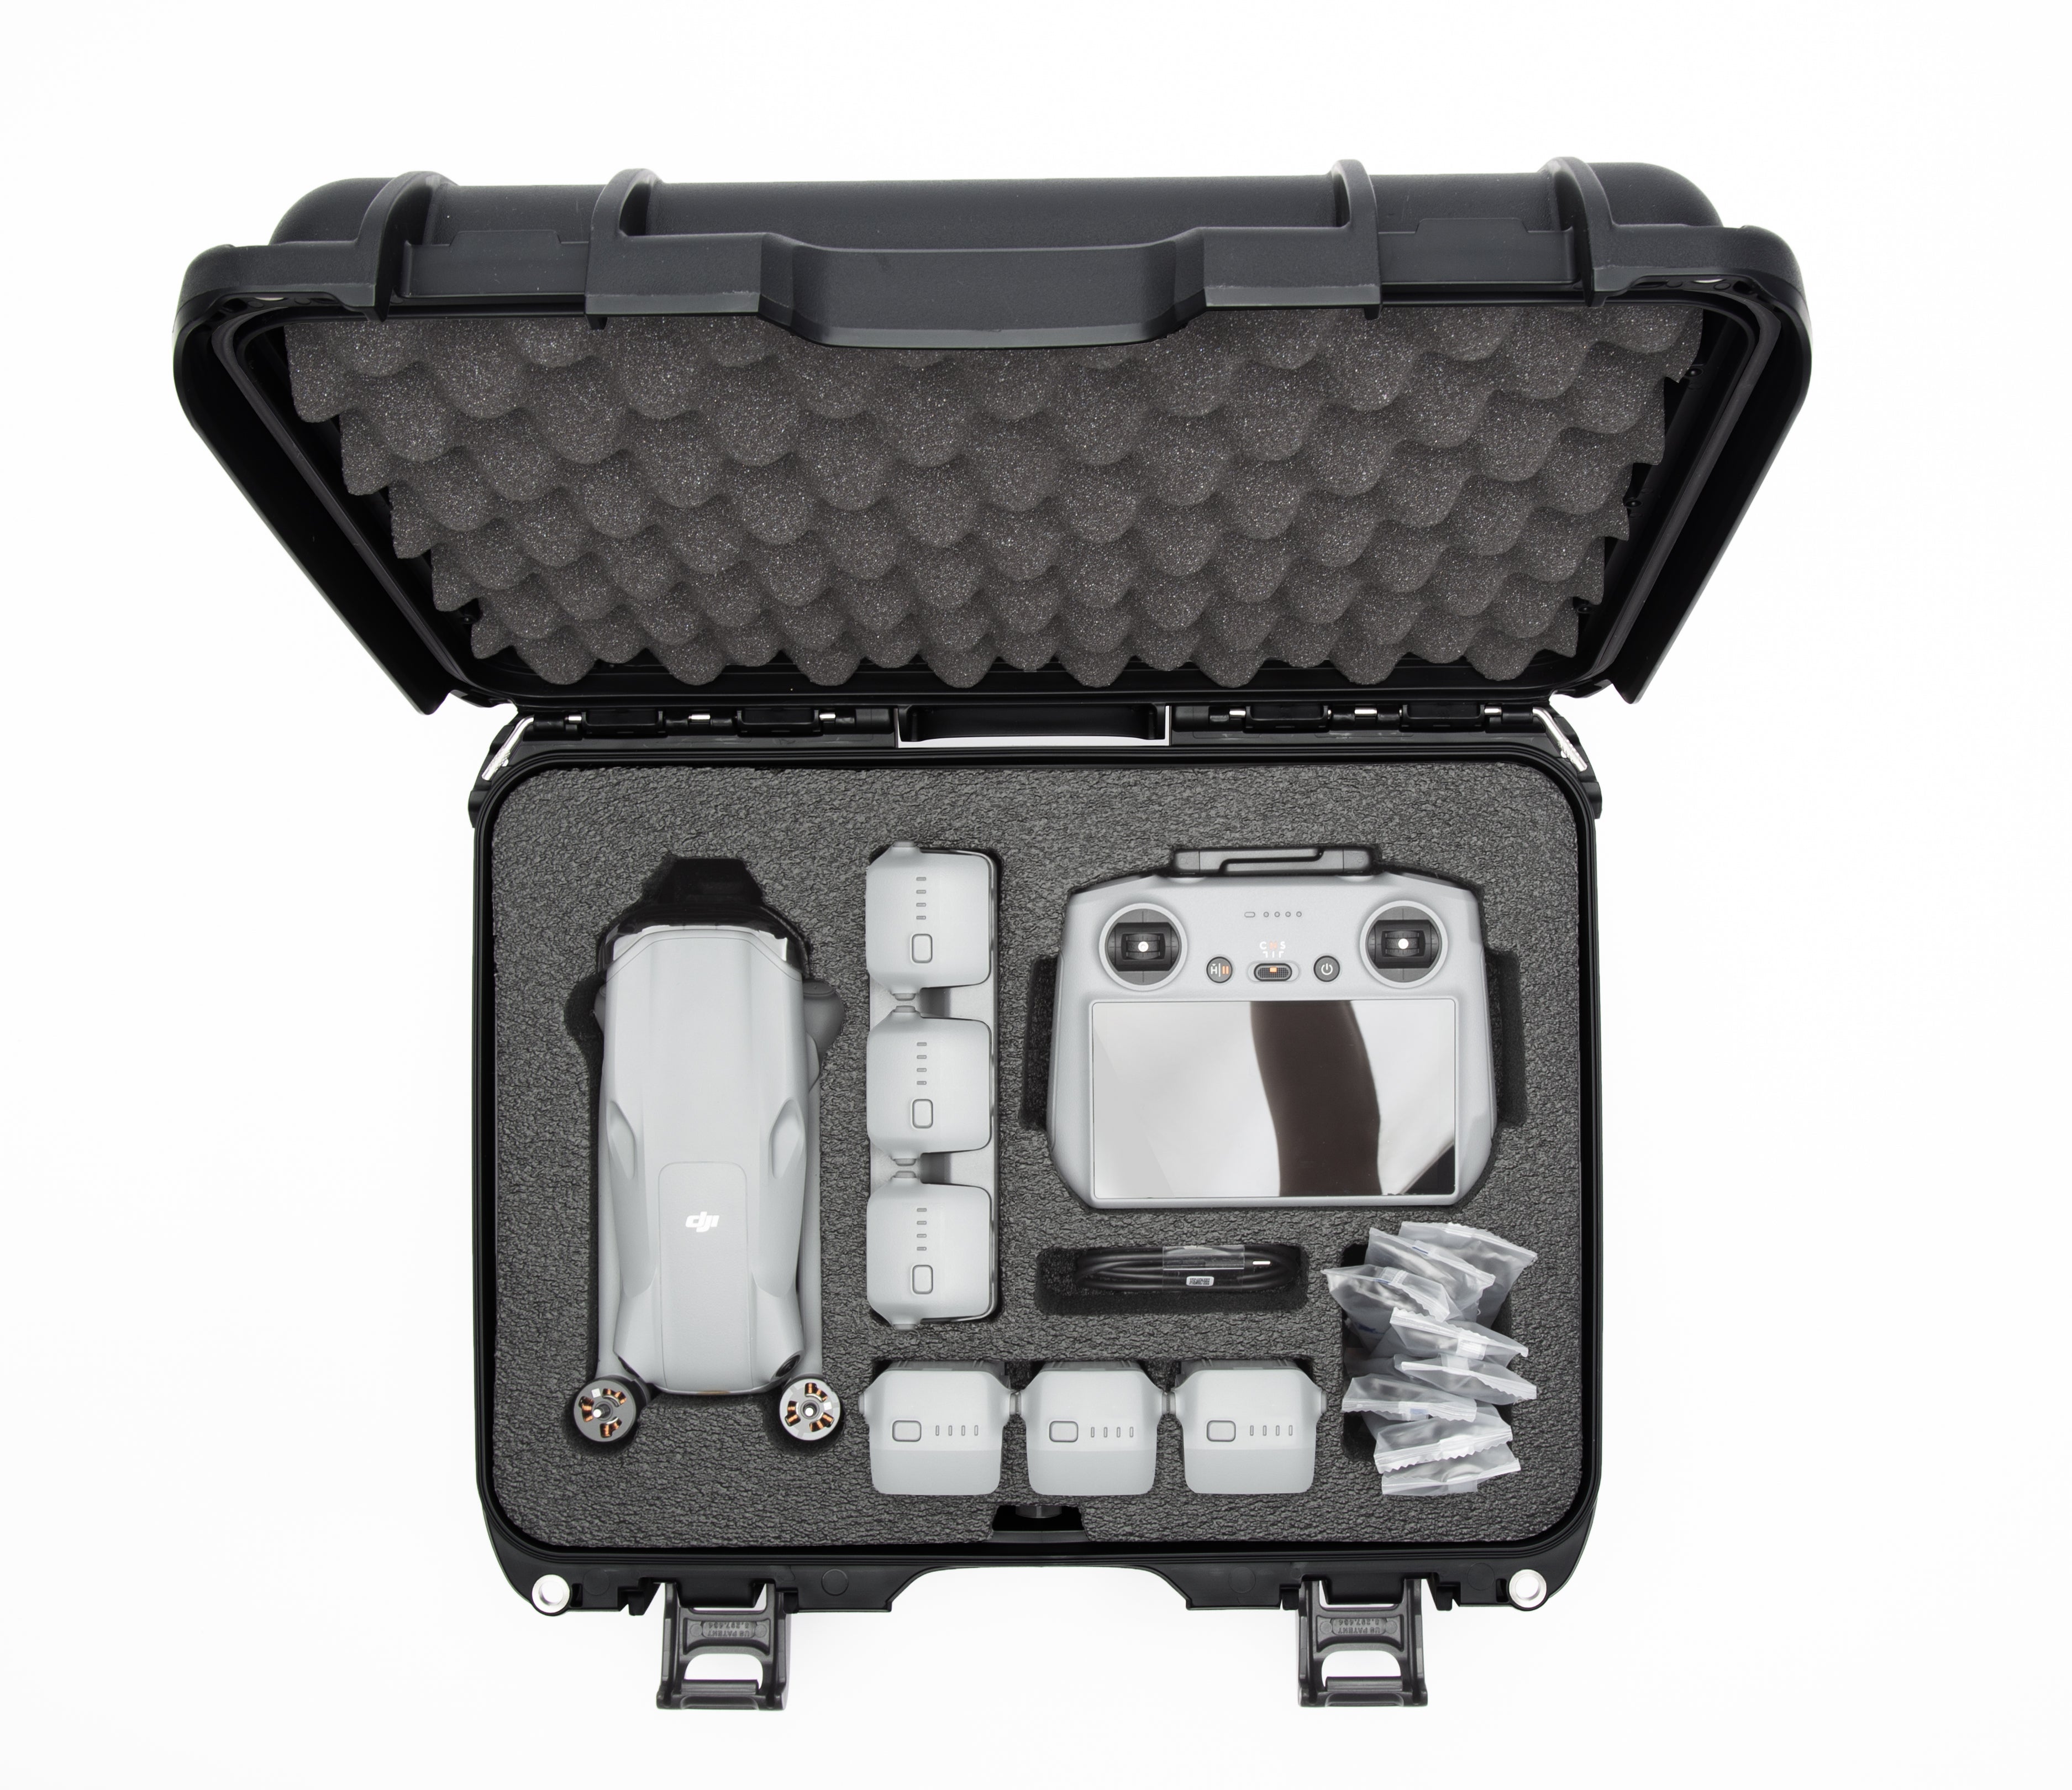 NANUK Protective Cases for DJI™ Drones, Stabilizers & Cameras 